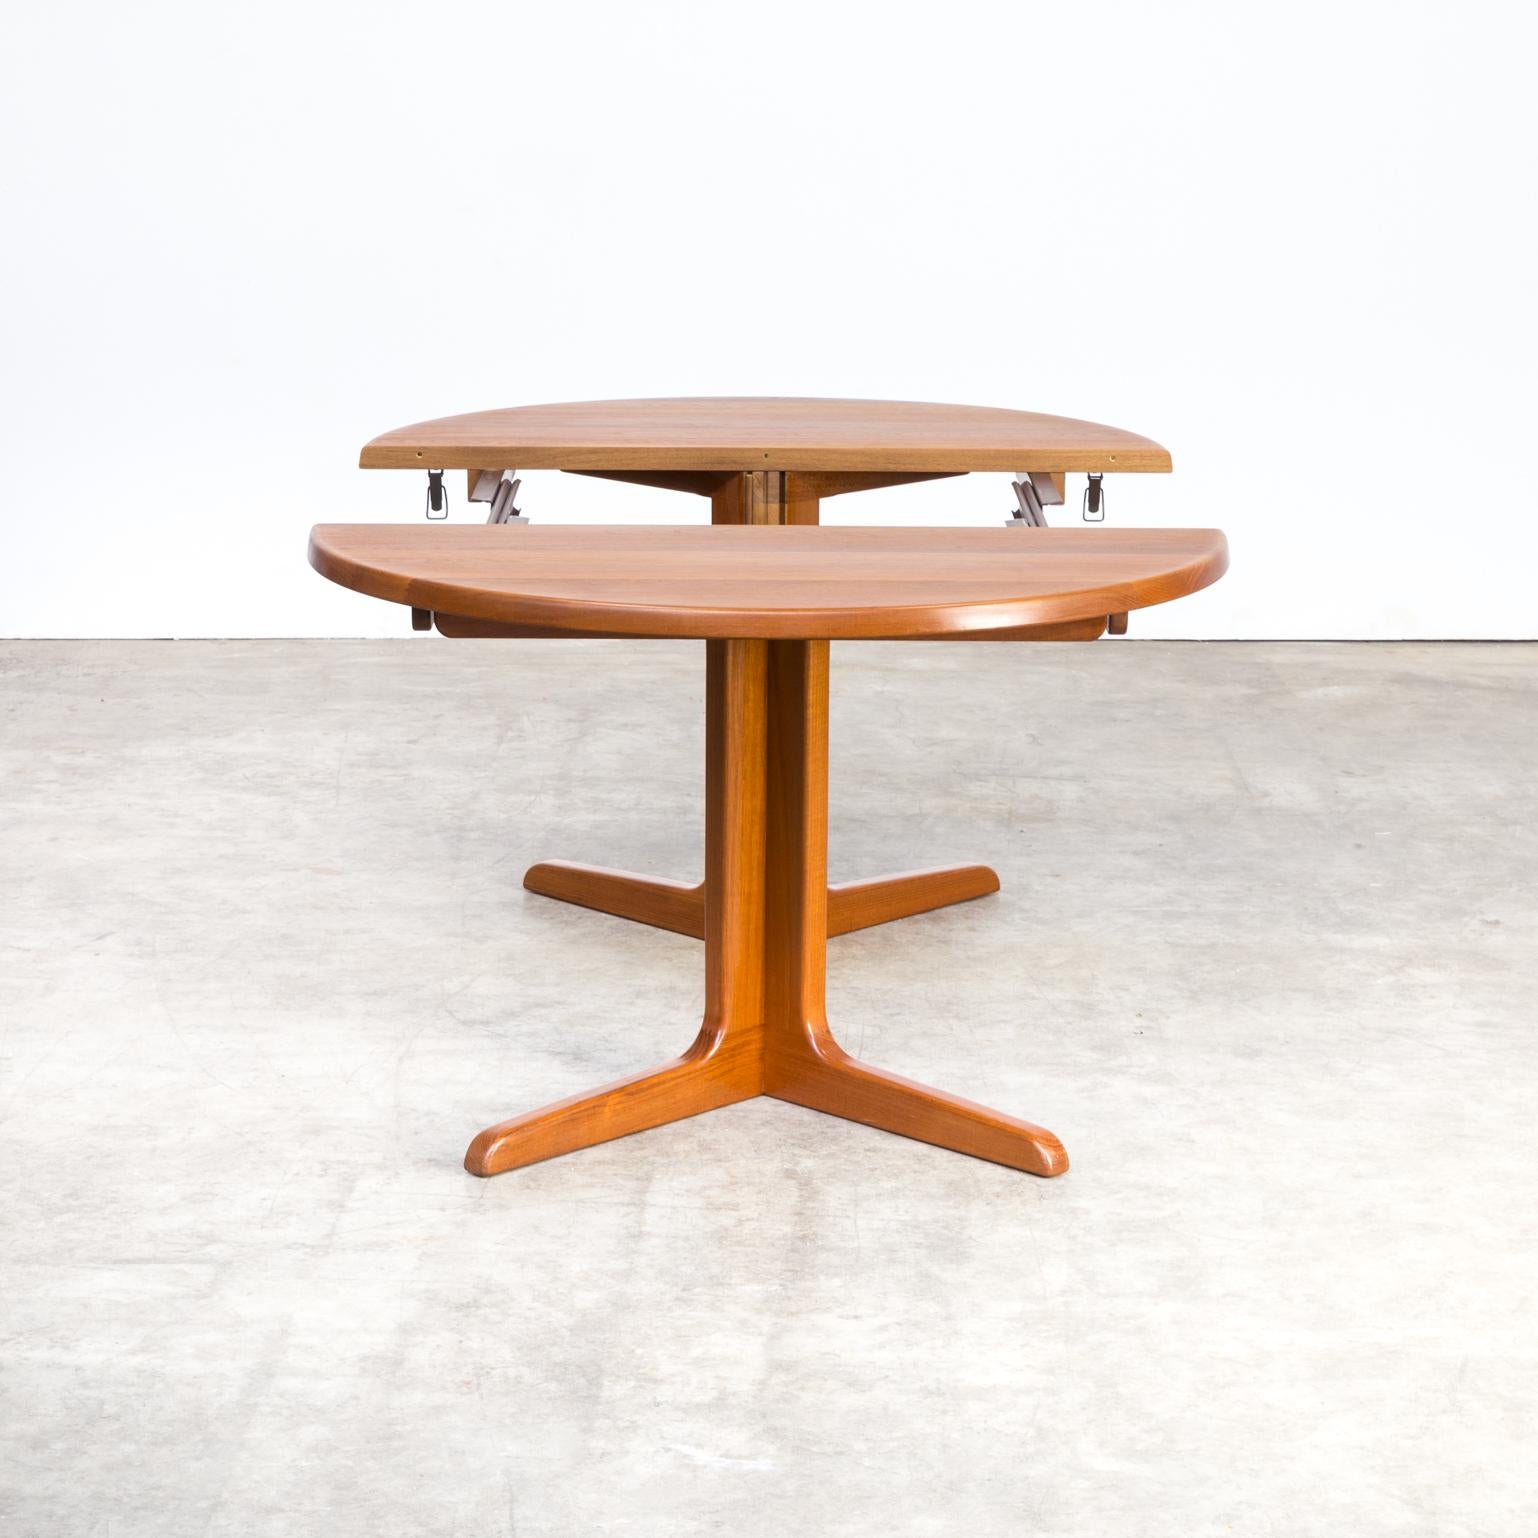 1960s Niels Bach extendable dinner table for Niels Bach a/s. Good condition consistent with age and use.